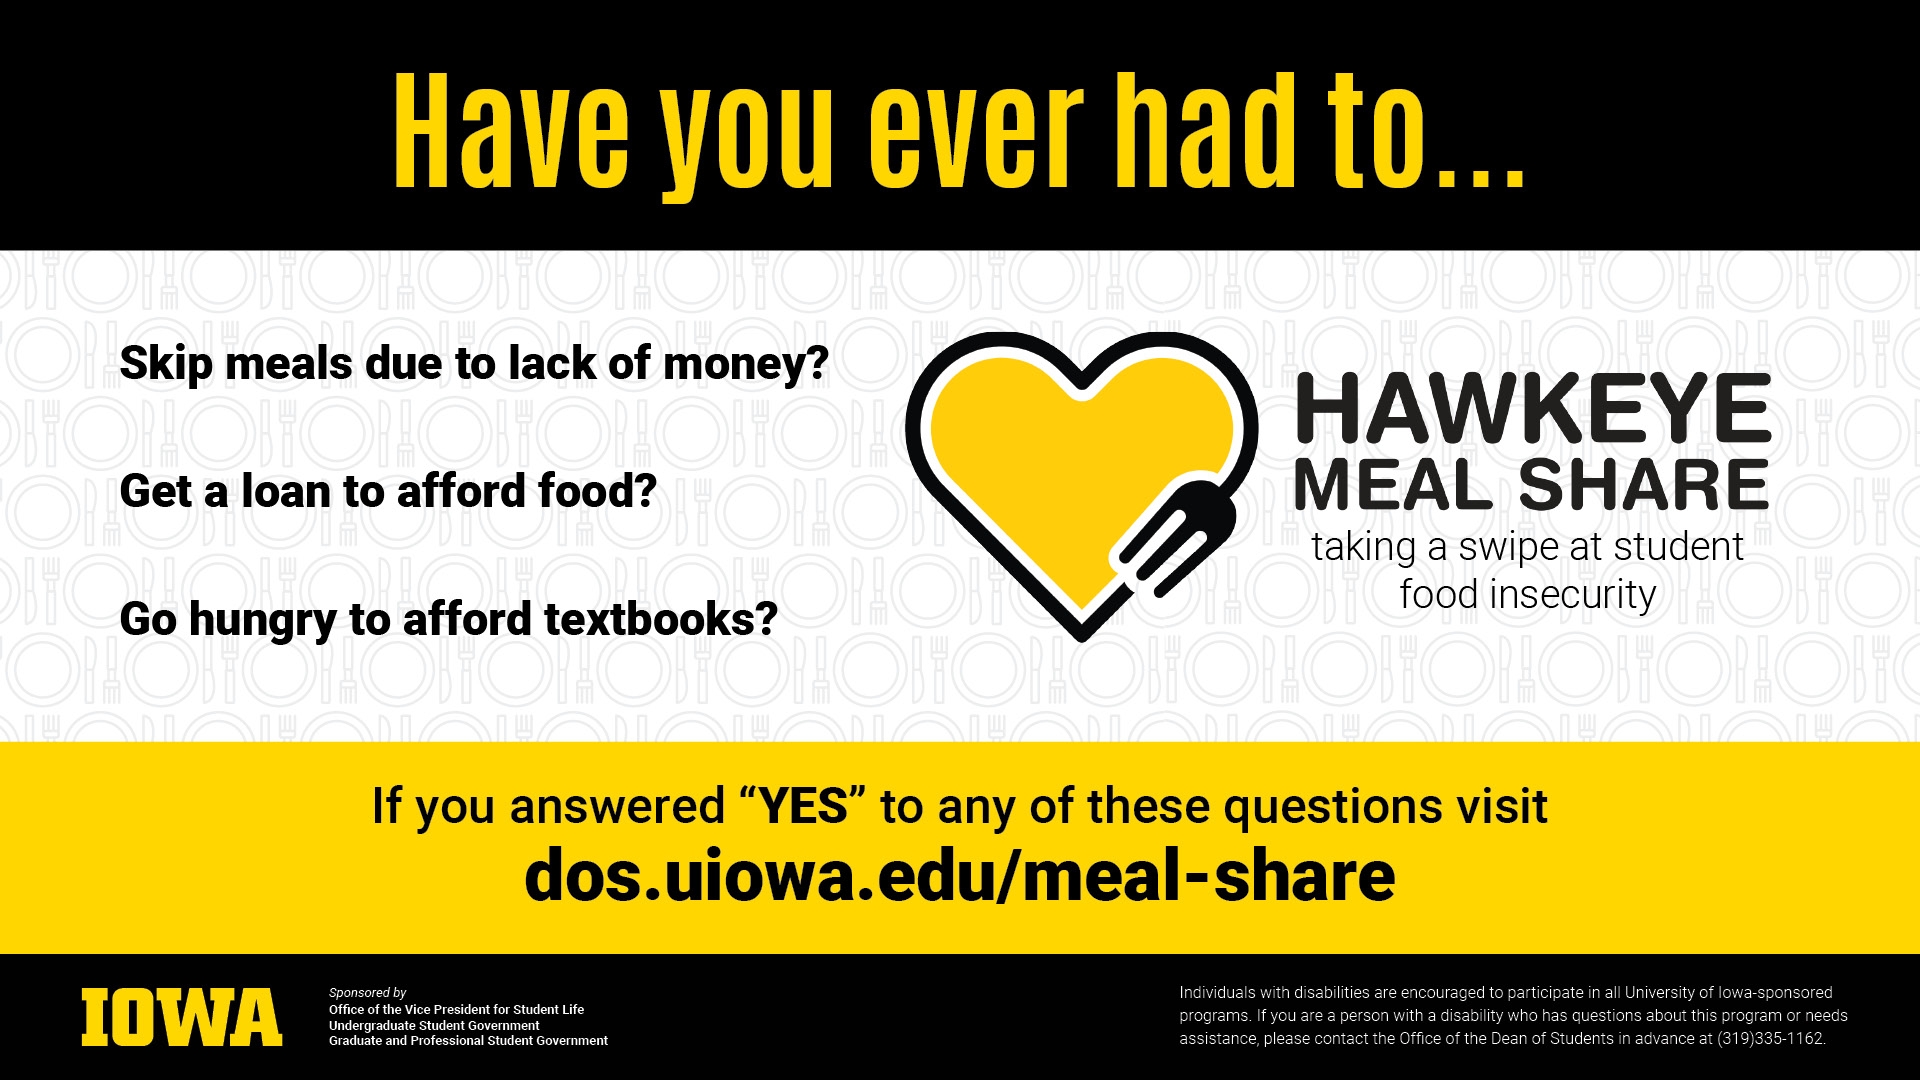 Have you ever had to... Skip meals due to lack of money? Goat a loan to afford to feed? Go hungry to afford textbooks? If you answered 'YES' to any of these questions, visit dos.uiowa.edu/meal-share